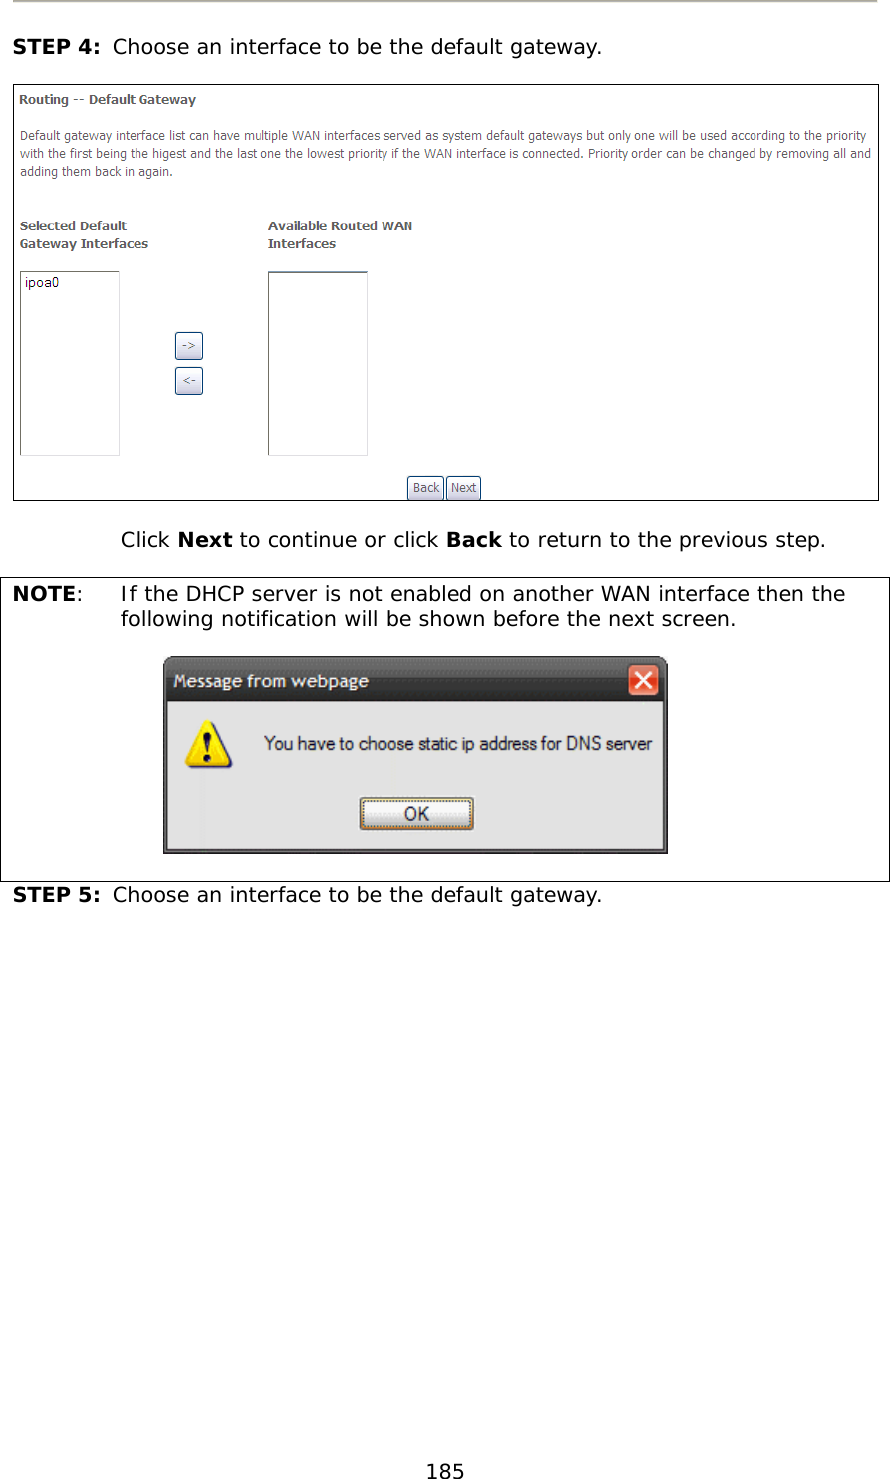  185   STEP 4:  Choose an interface to be the default gateway.     Click Next to continue or click Back to return to the previous step.  NOTE:  If the DHCP server is not enabled on another WAN interface then the following notification will be shown before the next screen.       STEP 5:  Choose an interface to be the default gateway. 